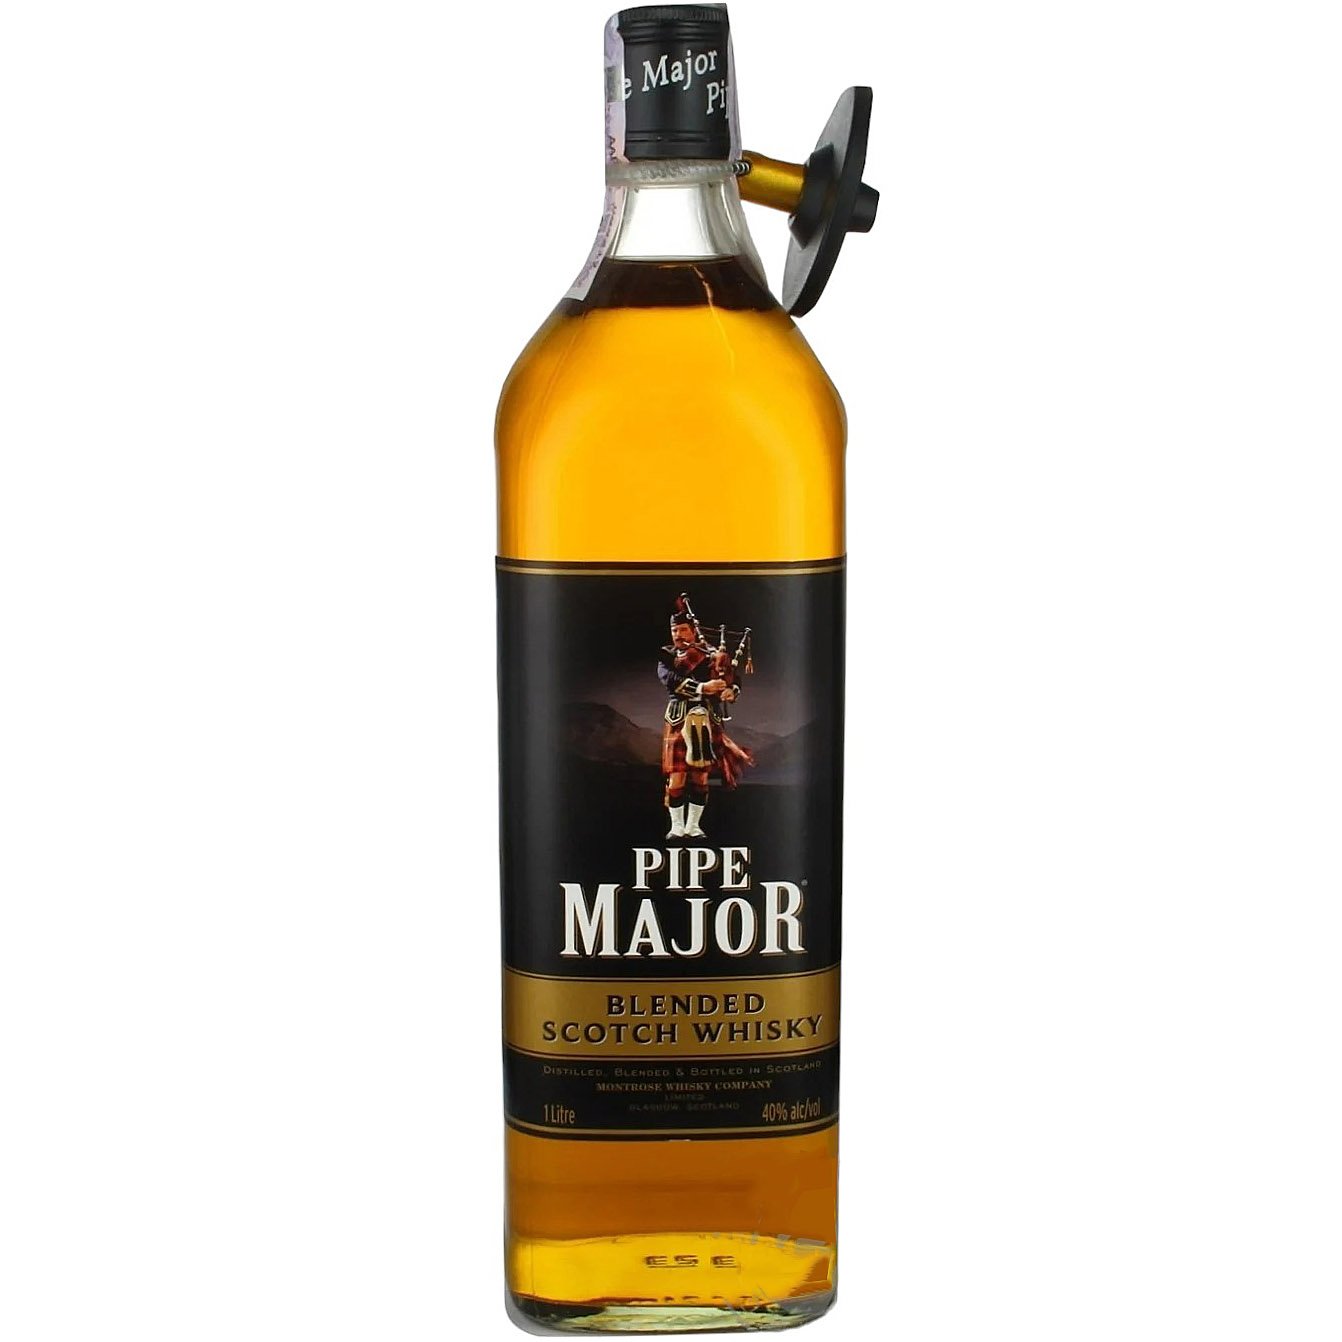 Виcки Pipe Major Blended Scotch Whisky 40% 1 л - фото 1